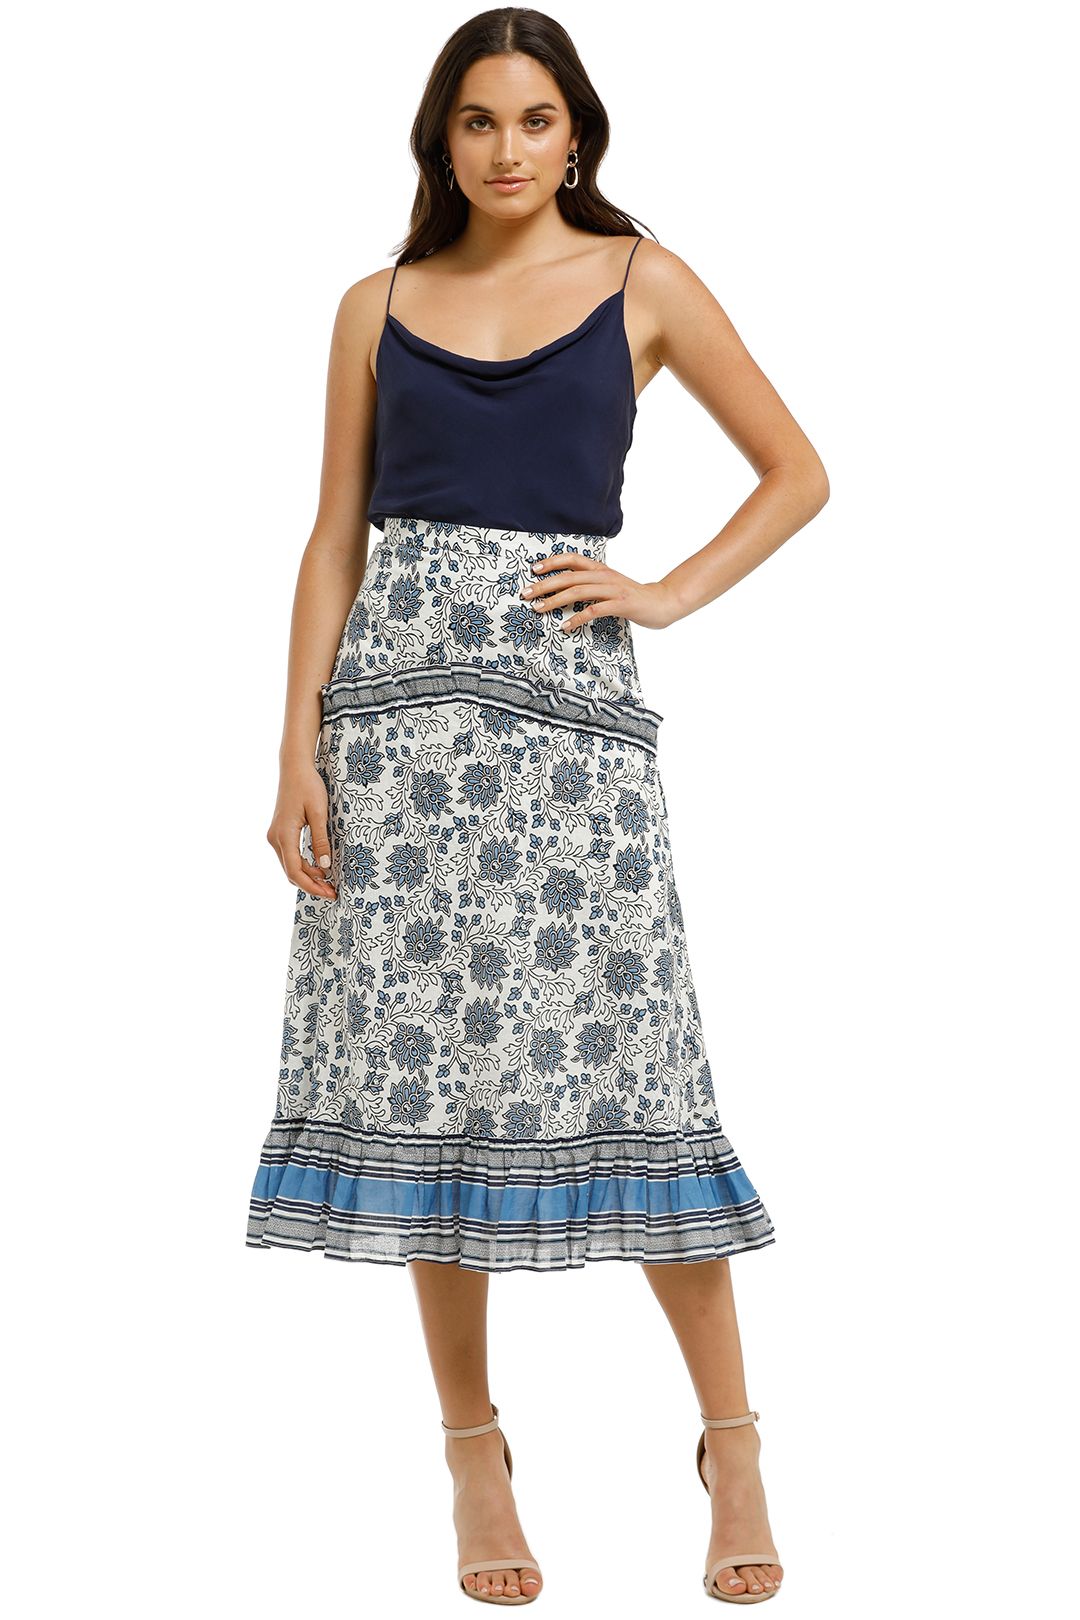 Stevie-May-These-Days-Skirt-Geo-Stripe-Front